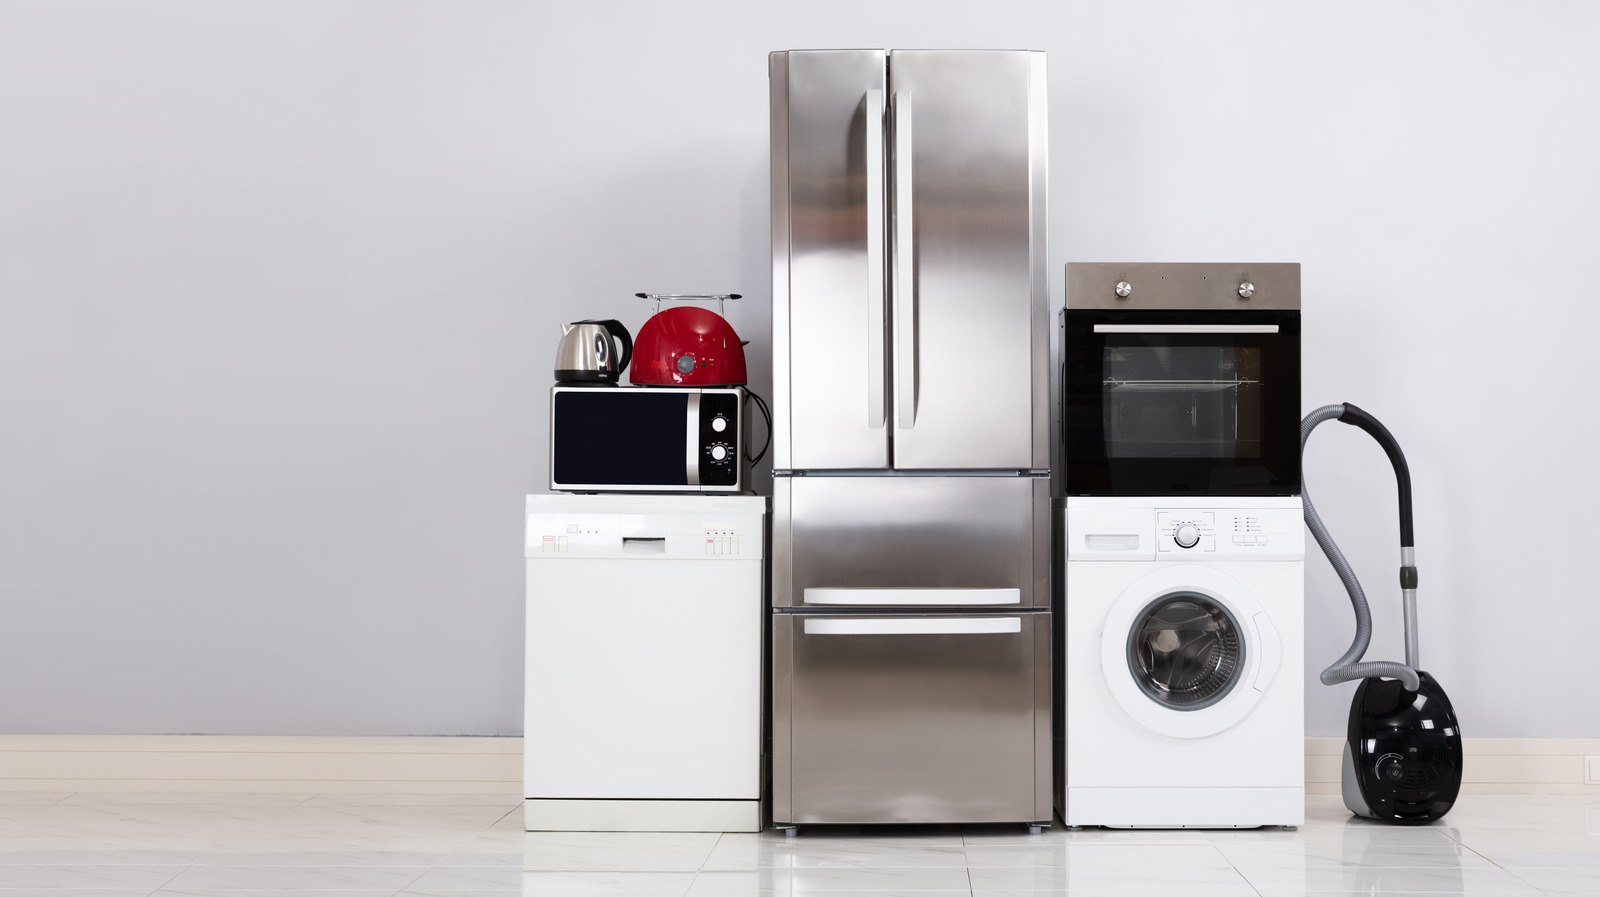 The Price Of Household Appliances Has Gone Up Drastically In The Last